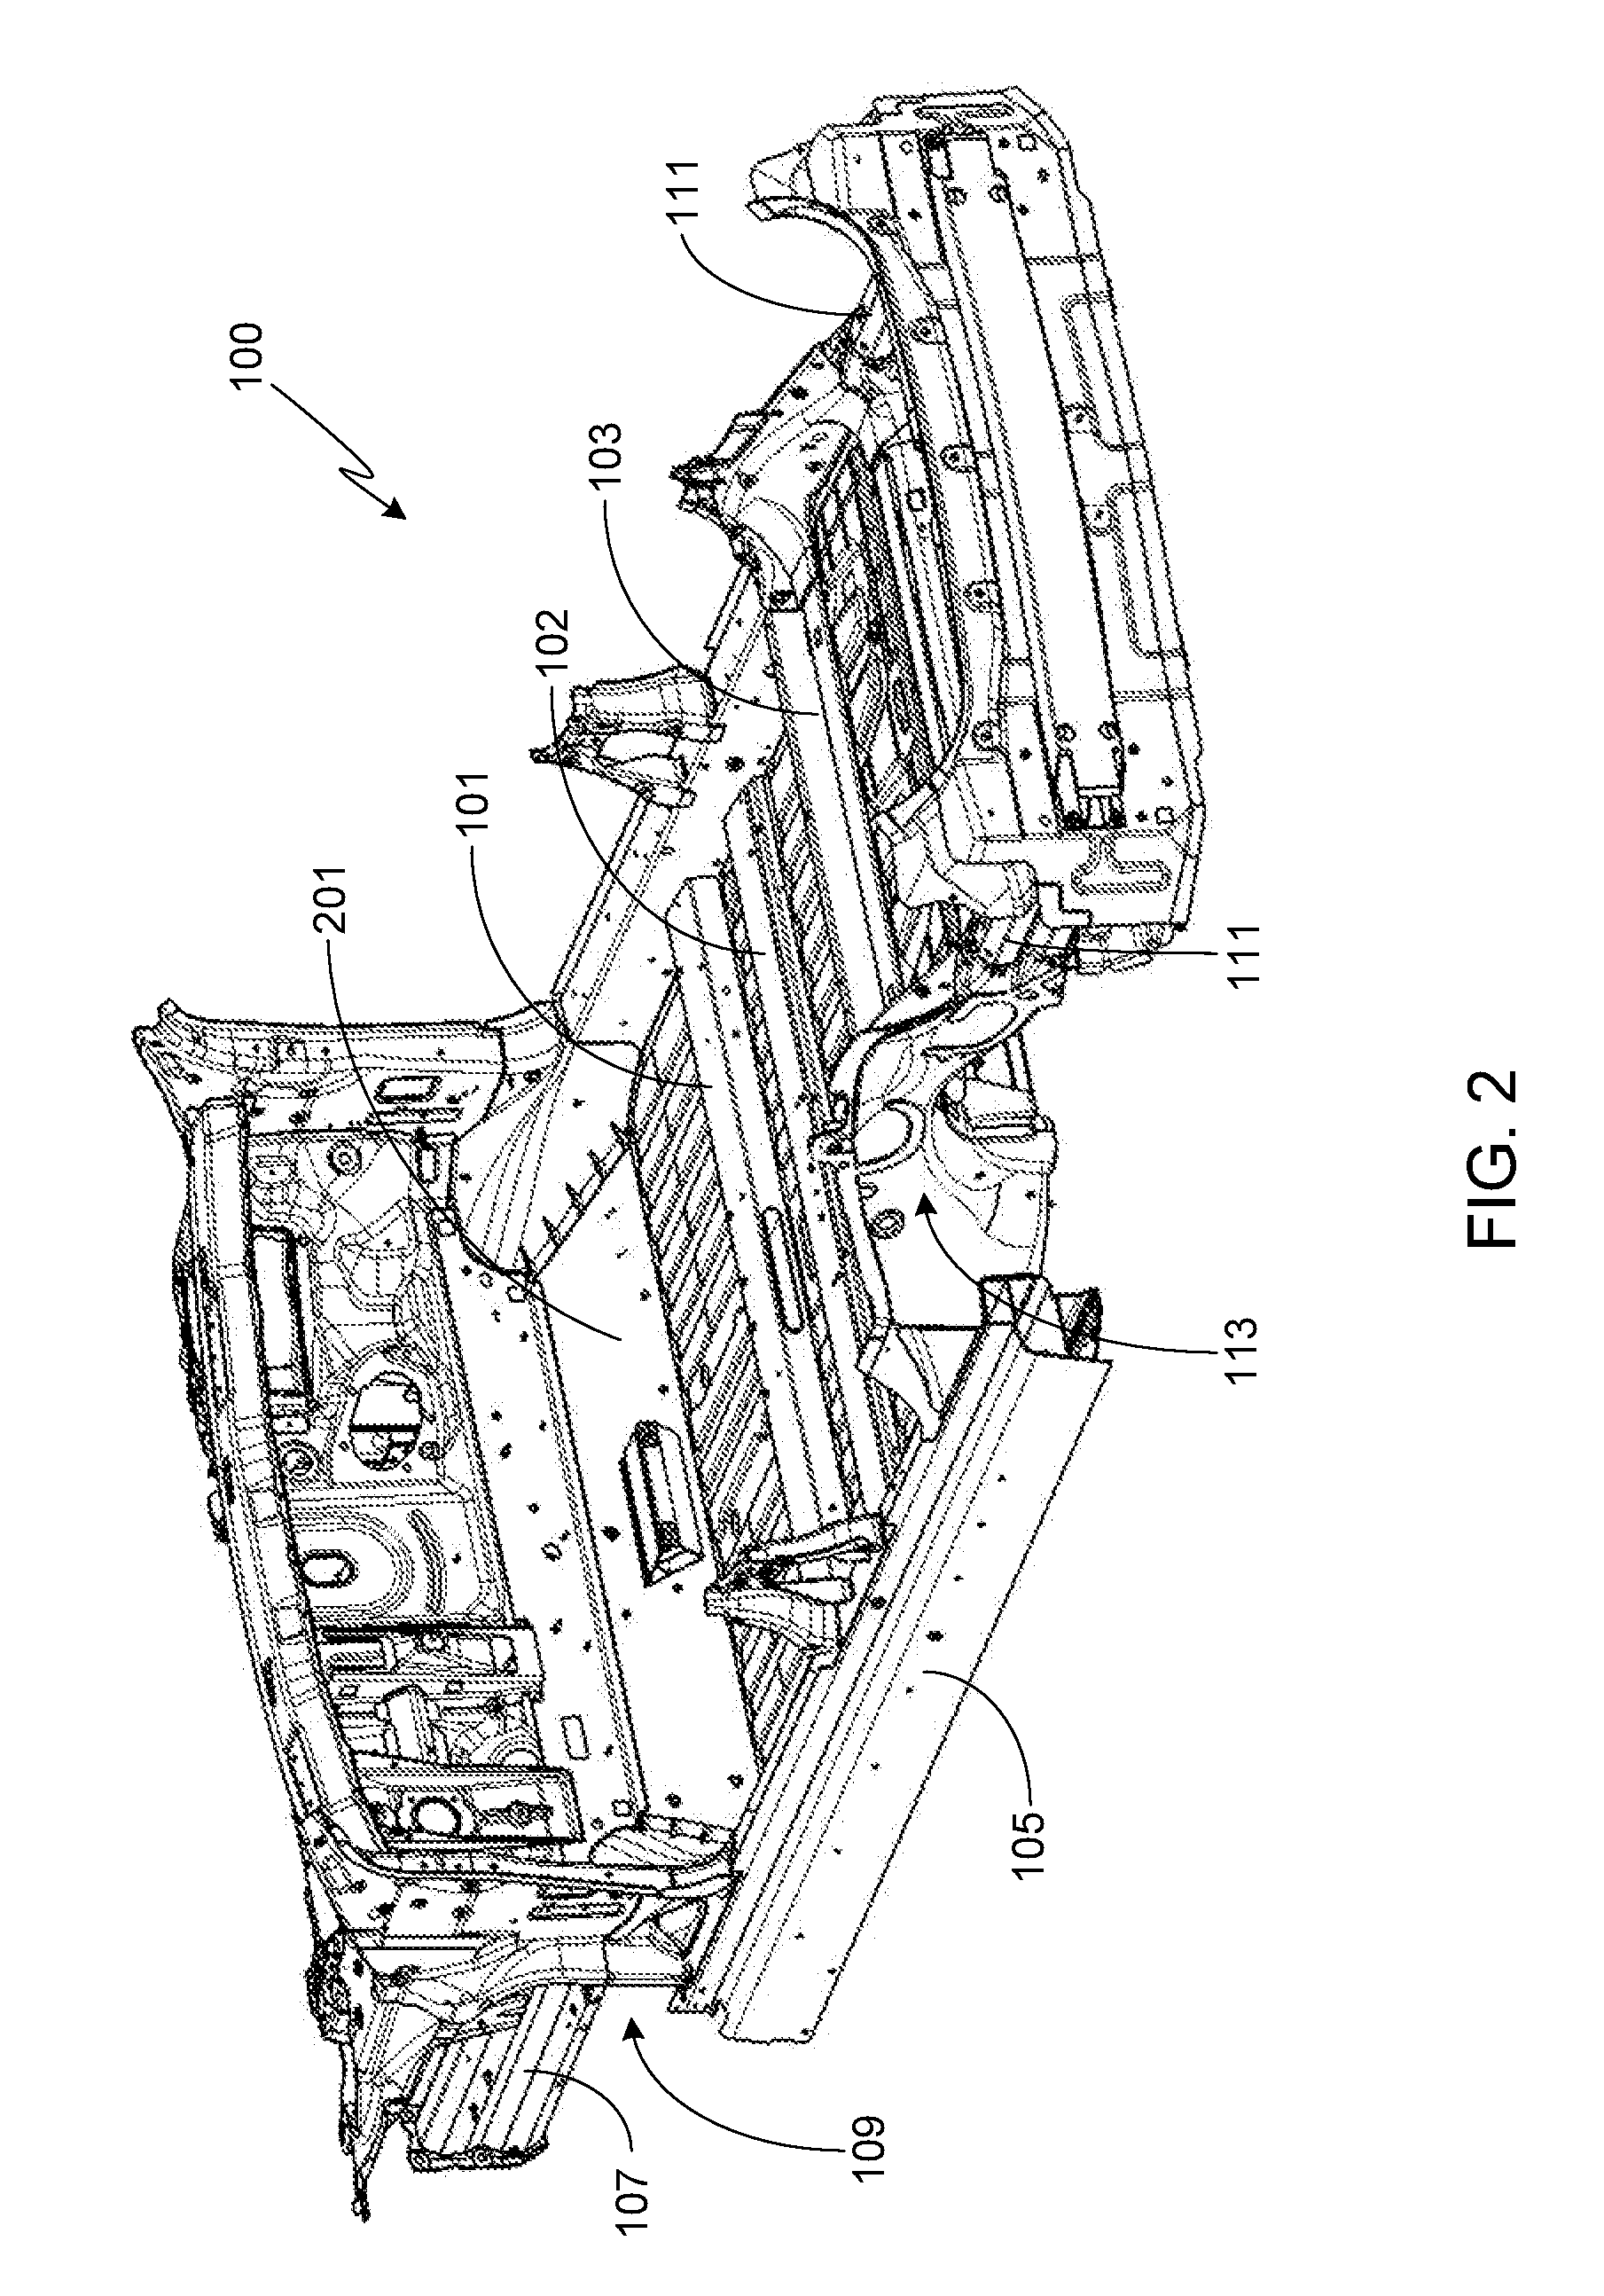 System for Absorbing and Distributing Side Impact Energy Utilizing an Integrated Battery Pack and Side Sill Assembly